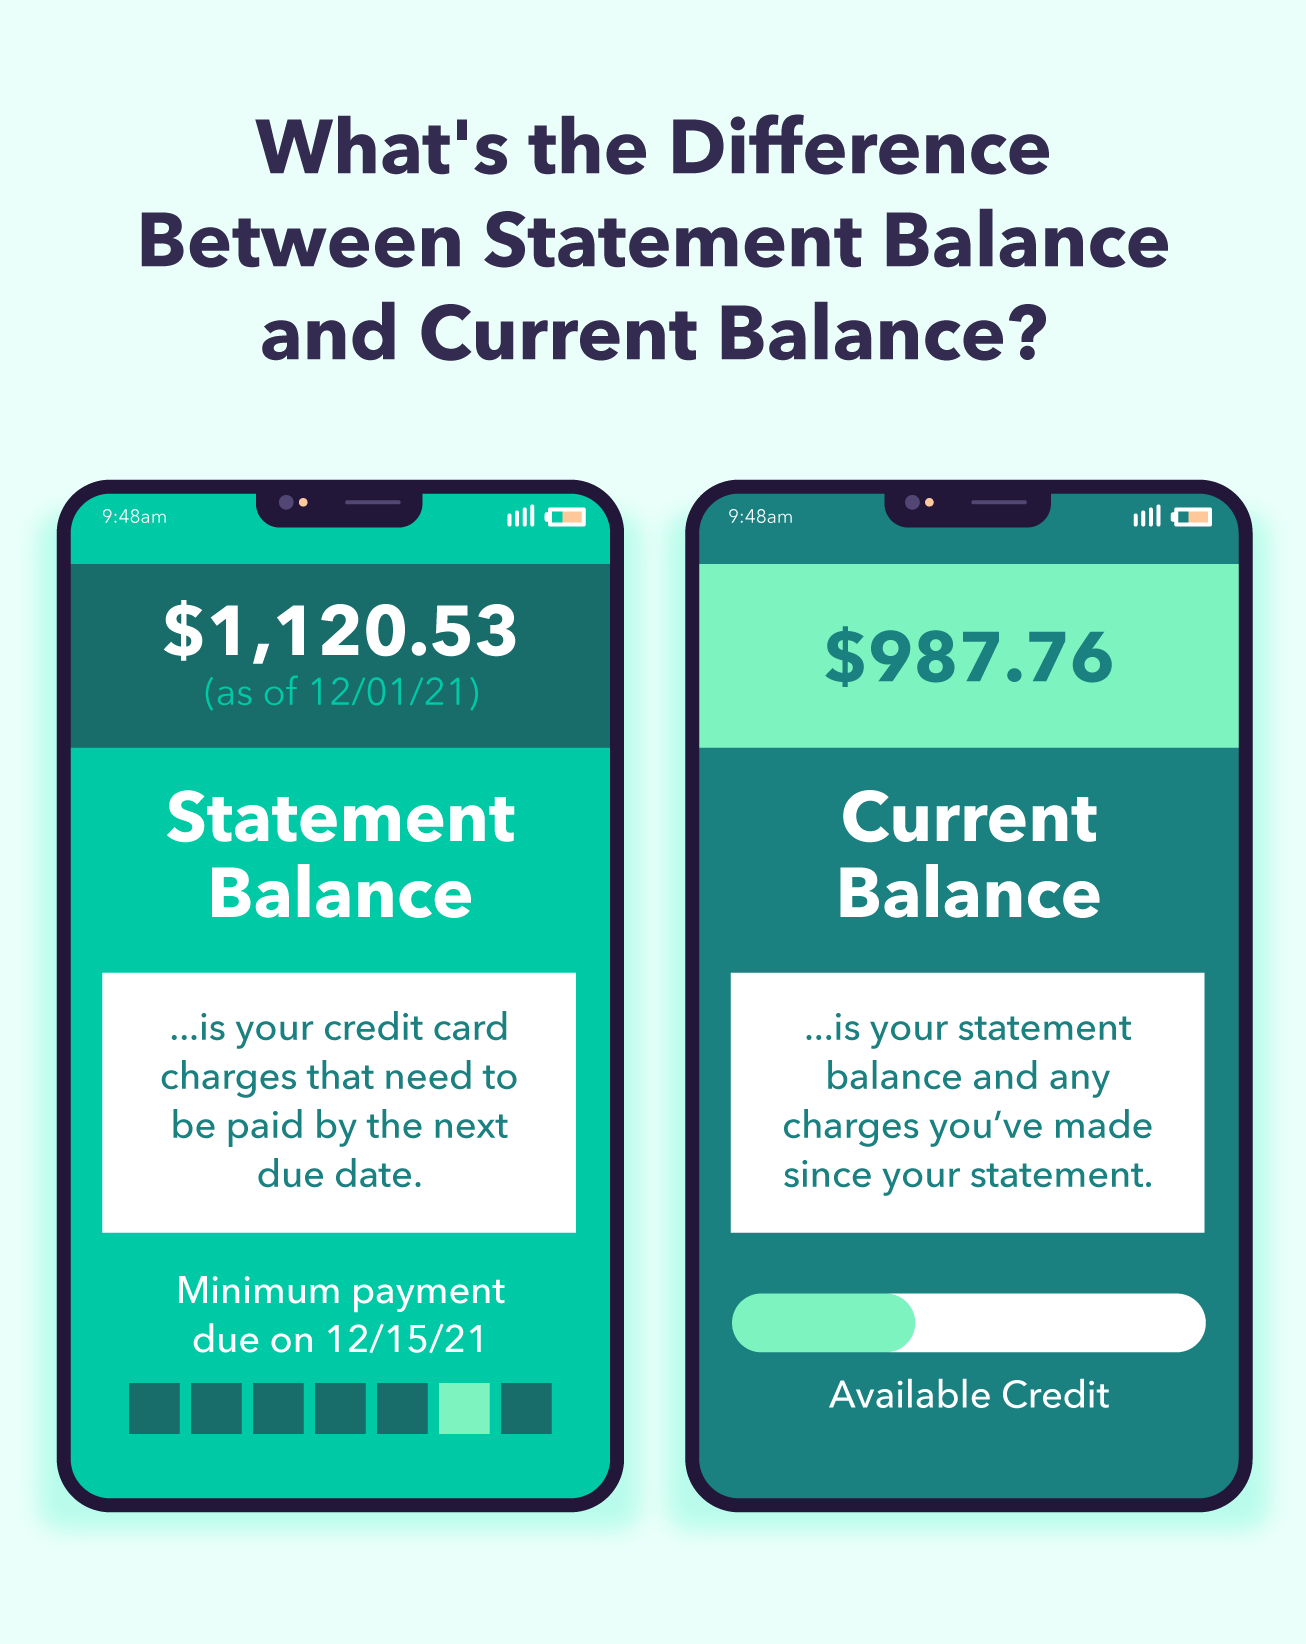 Two smartphone screens displaying the statement balance (credit card charges you need to pay by the next due date) and the current balance (statement balance plus any recent charges).